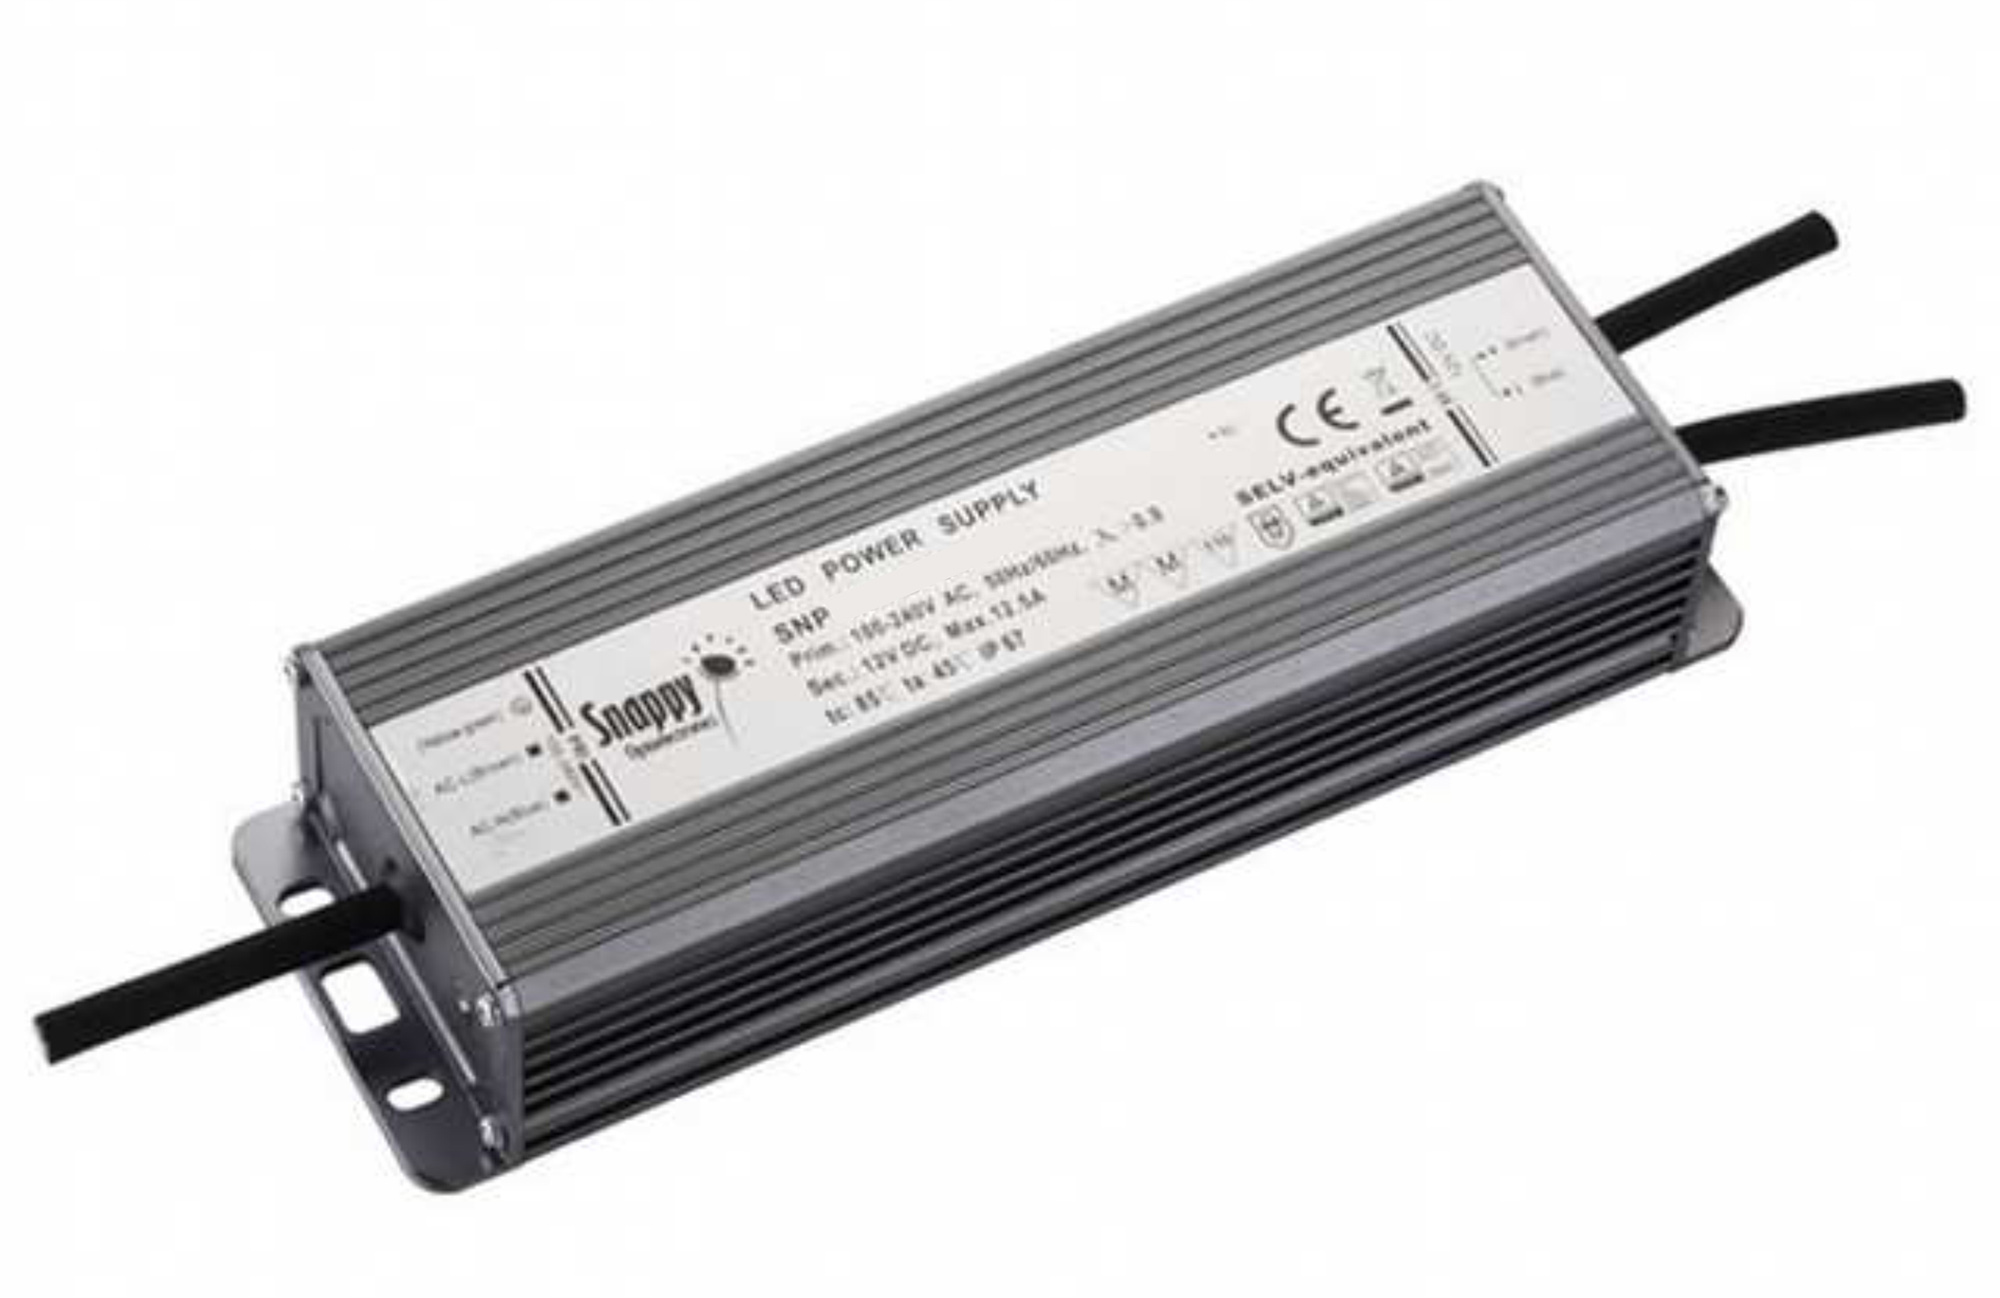 SPE100-24VLP  SPE, 100W, Constant Voltage Non Dimmable Aluminum LED Driver, 24VDC, 4.17A, Pf>0.9, TC:+90?, TA:45?, IP67, Effi>85%, Screw Connection, 3yrs Warranty.